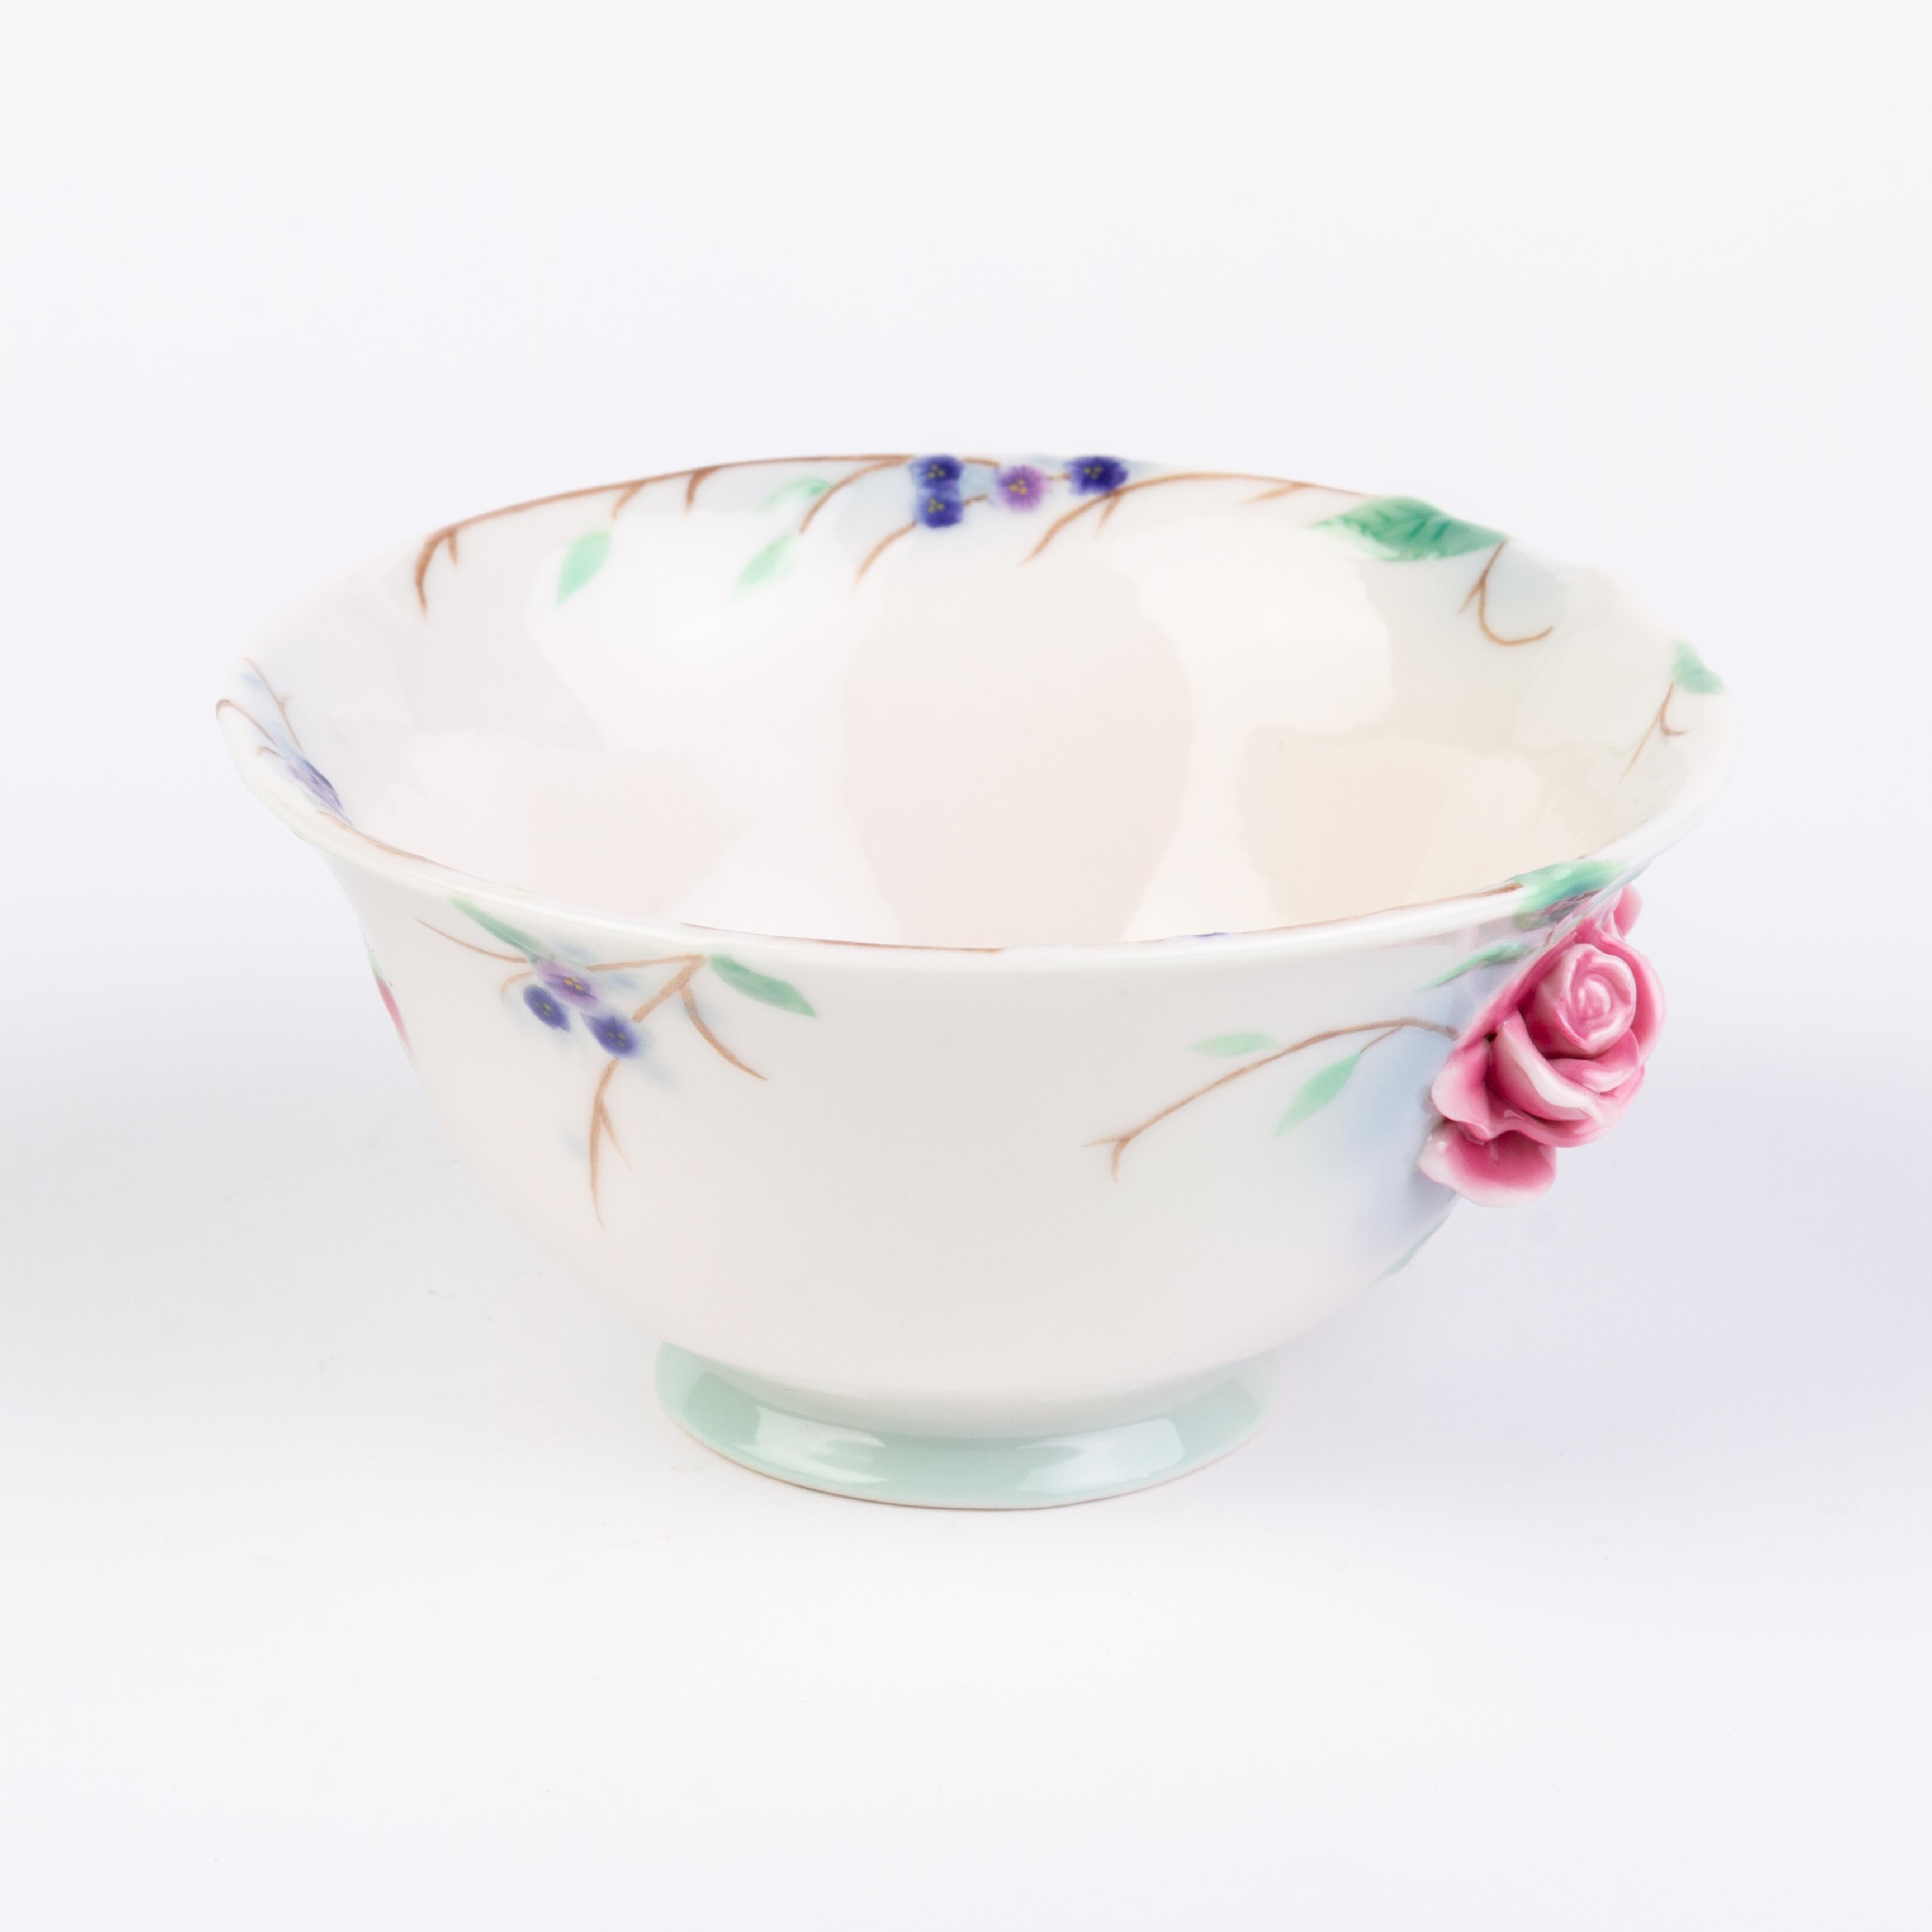 Franz Porcelain Relief Roses Bowl for Royal Doulton
Good condition
From a private collection.
Free international shipping.